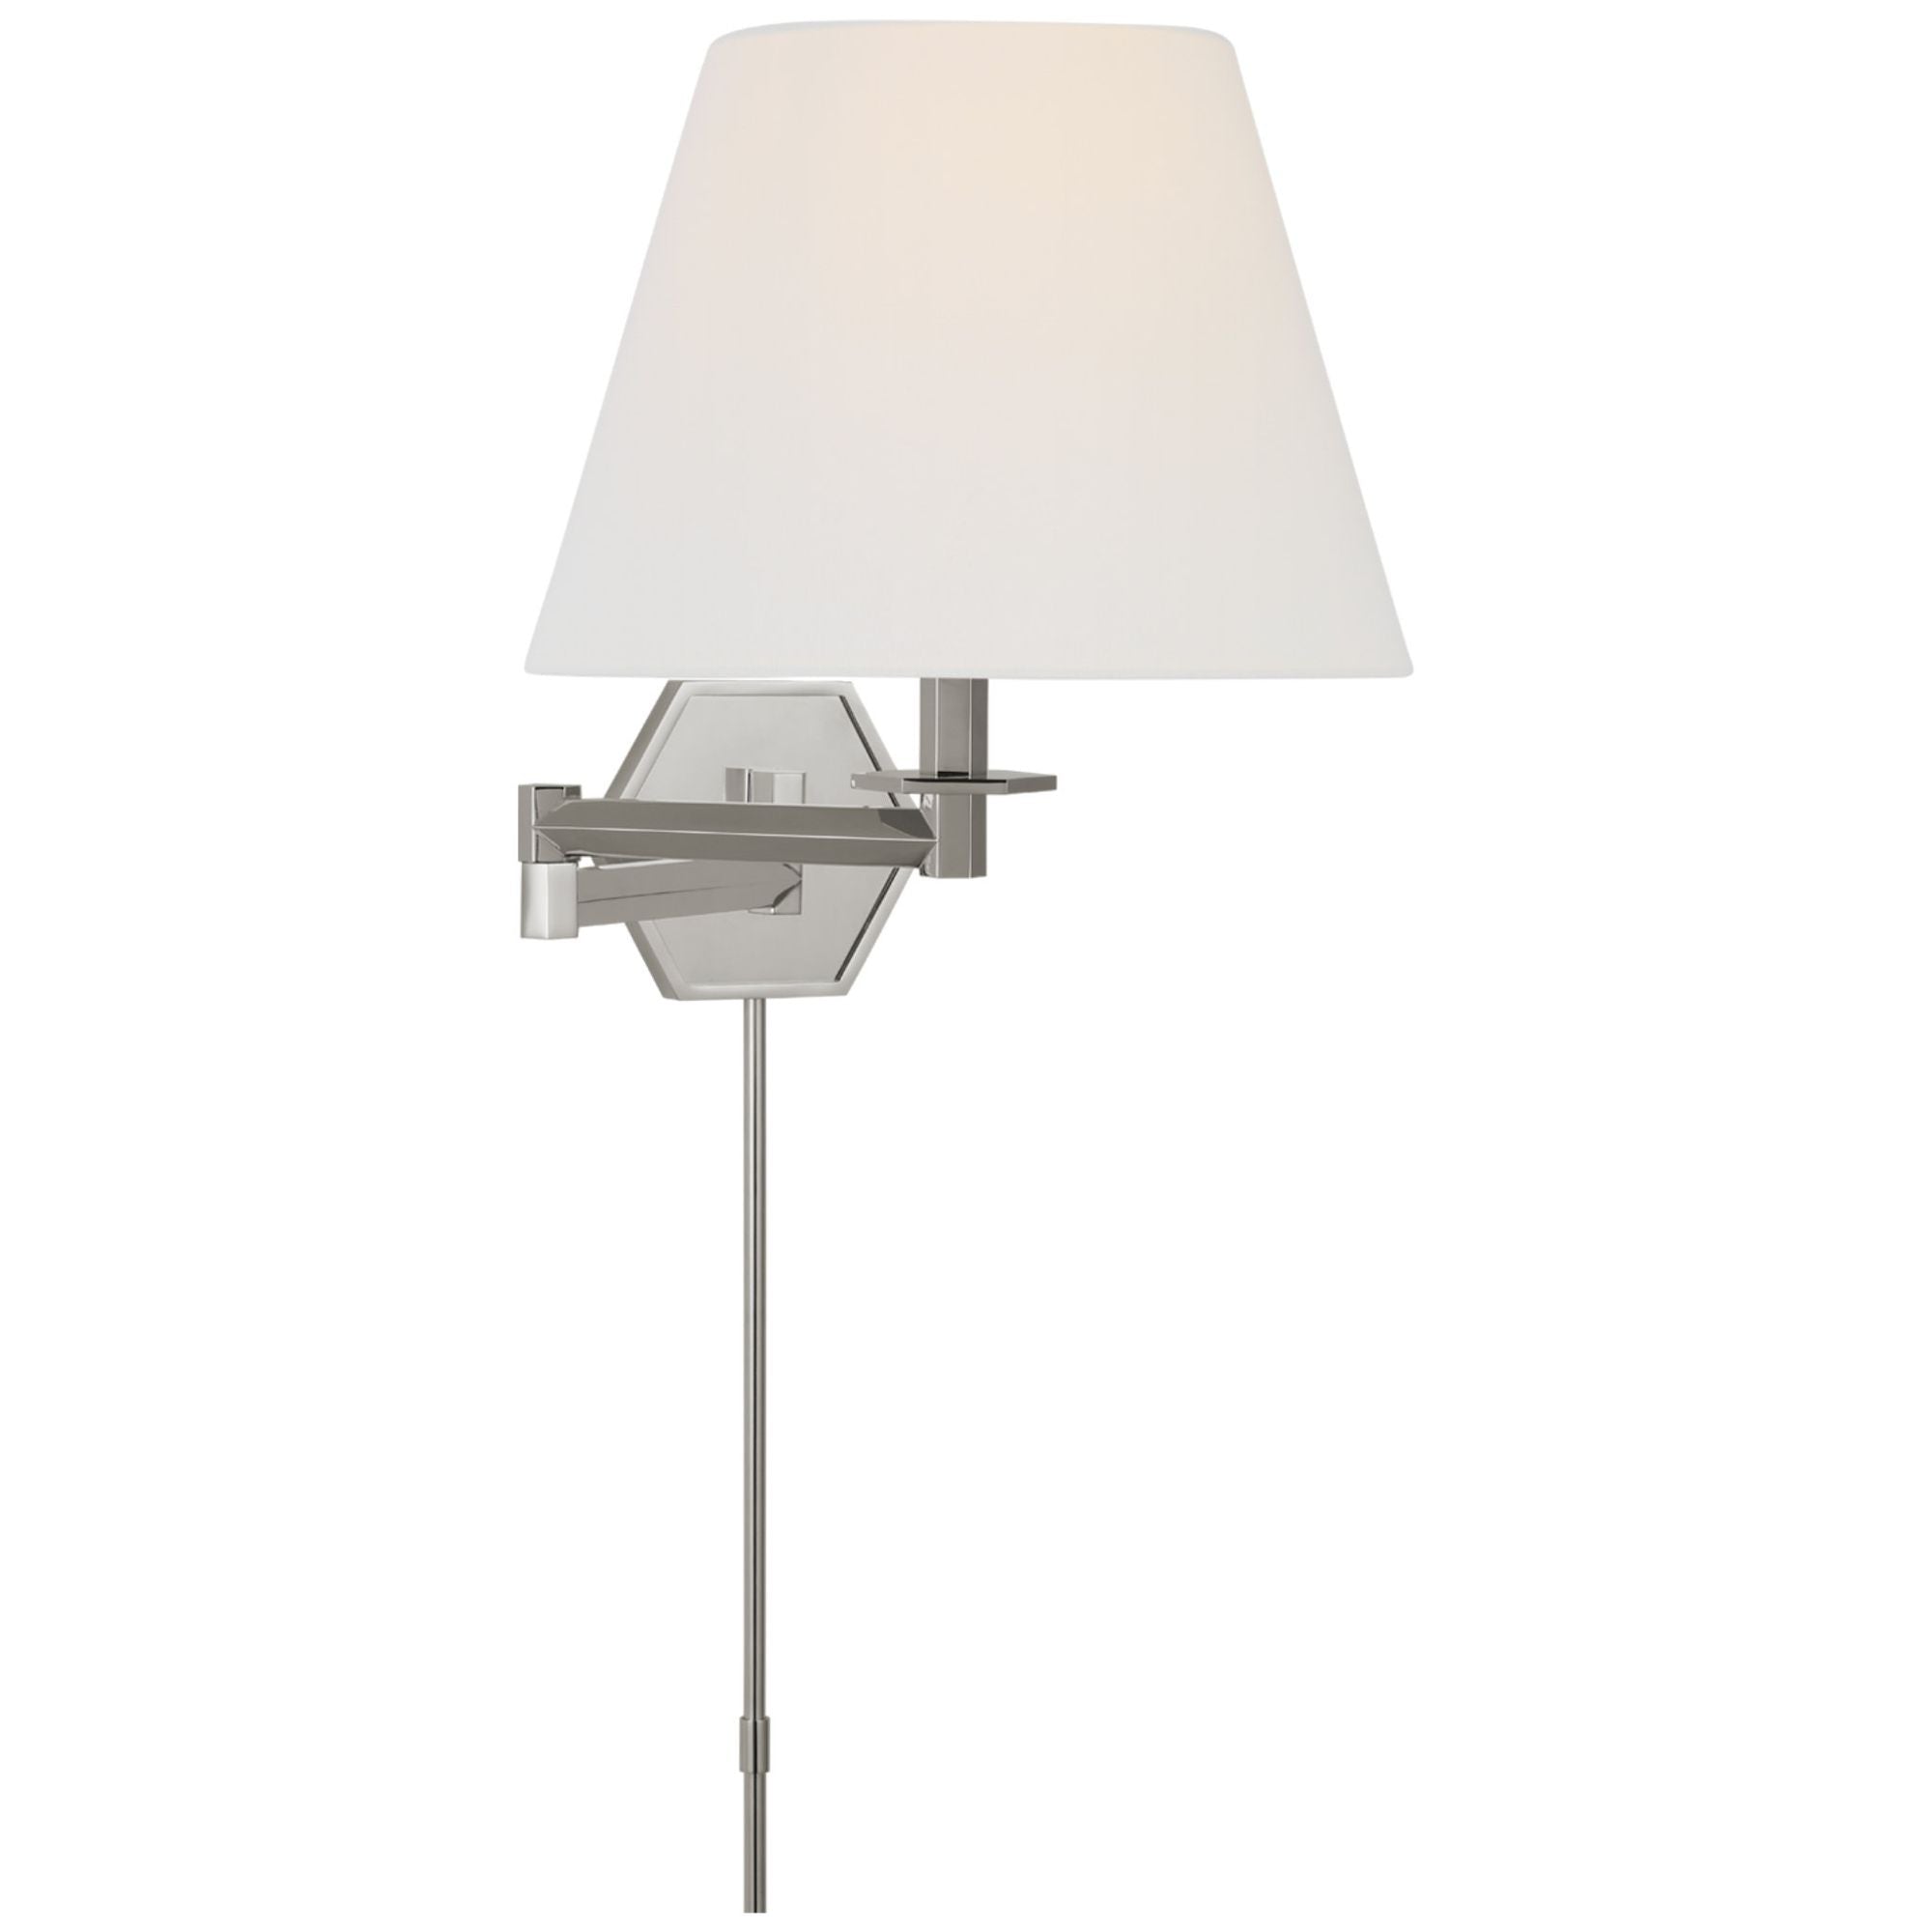 Paloma Contreras Olivier Swing Arm Wall Light in Polished Nickel with Linen Shade